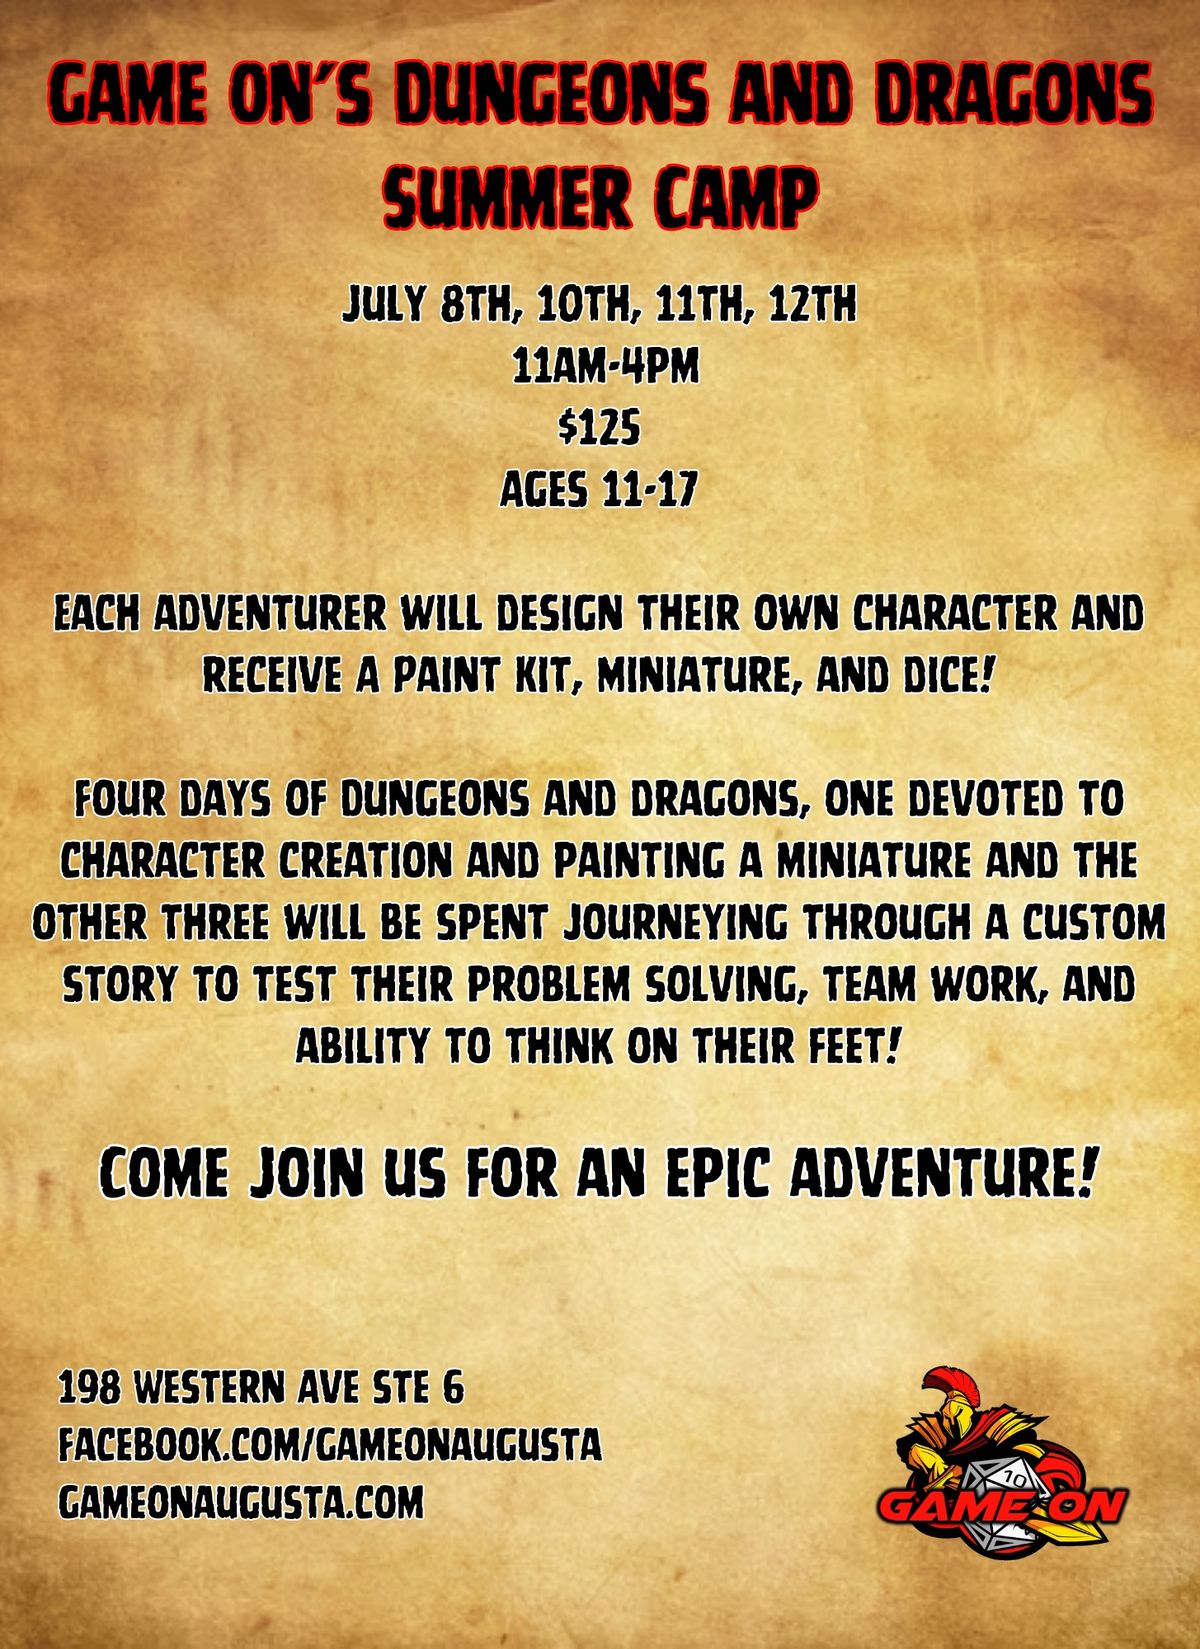 Game On's Dungeons and Dragons Summer Camp